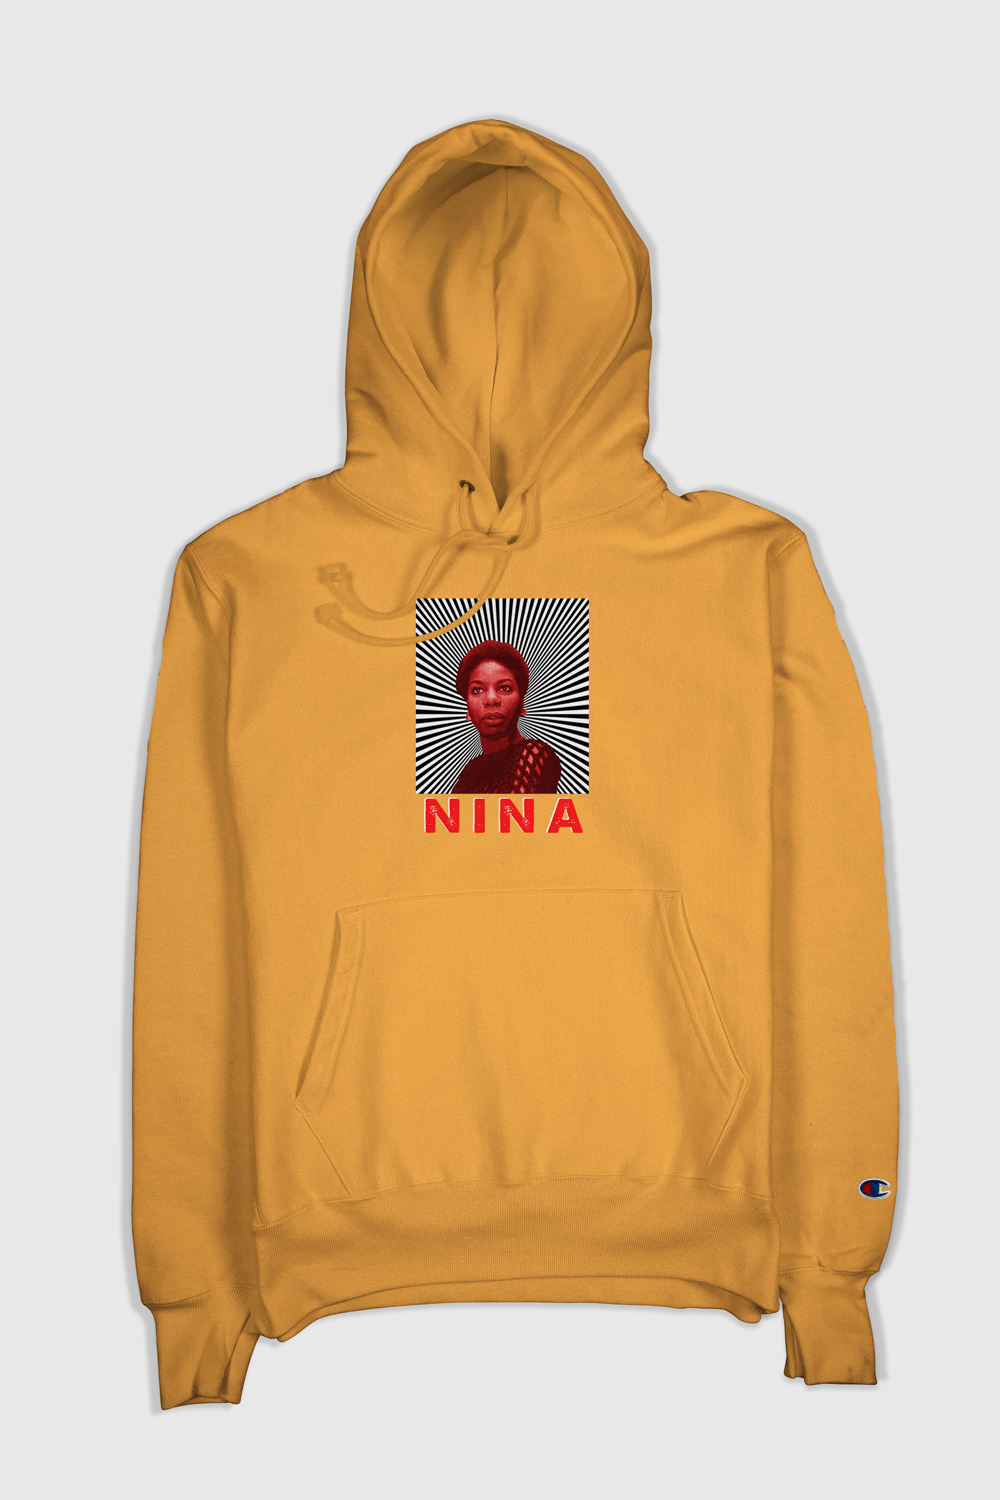 Nina Simone Red Tint with Sunrays Premium Hoodie Unisex - Canary Yellow 12 oz Champion Reverse Weave Pullover